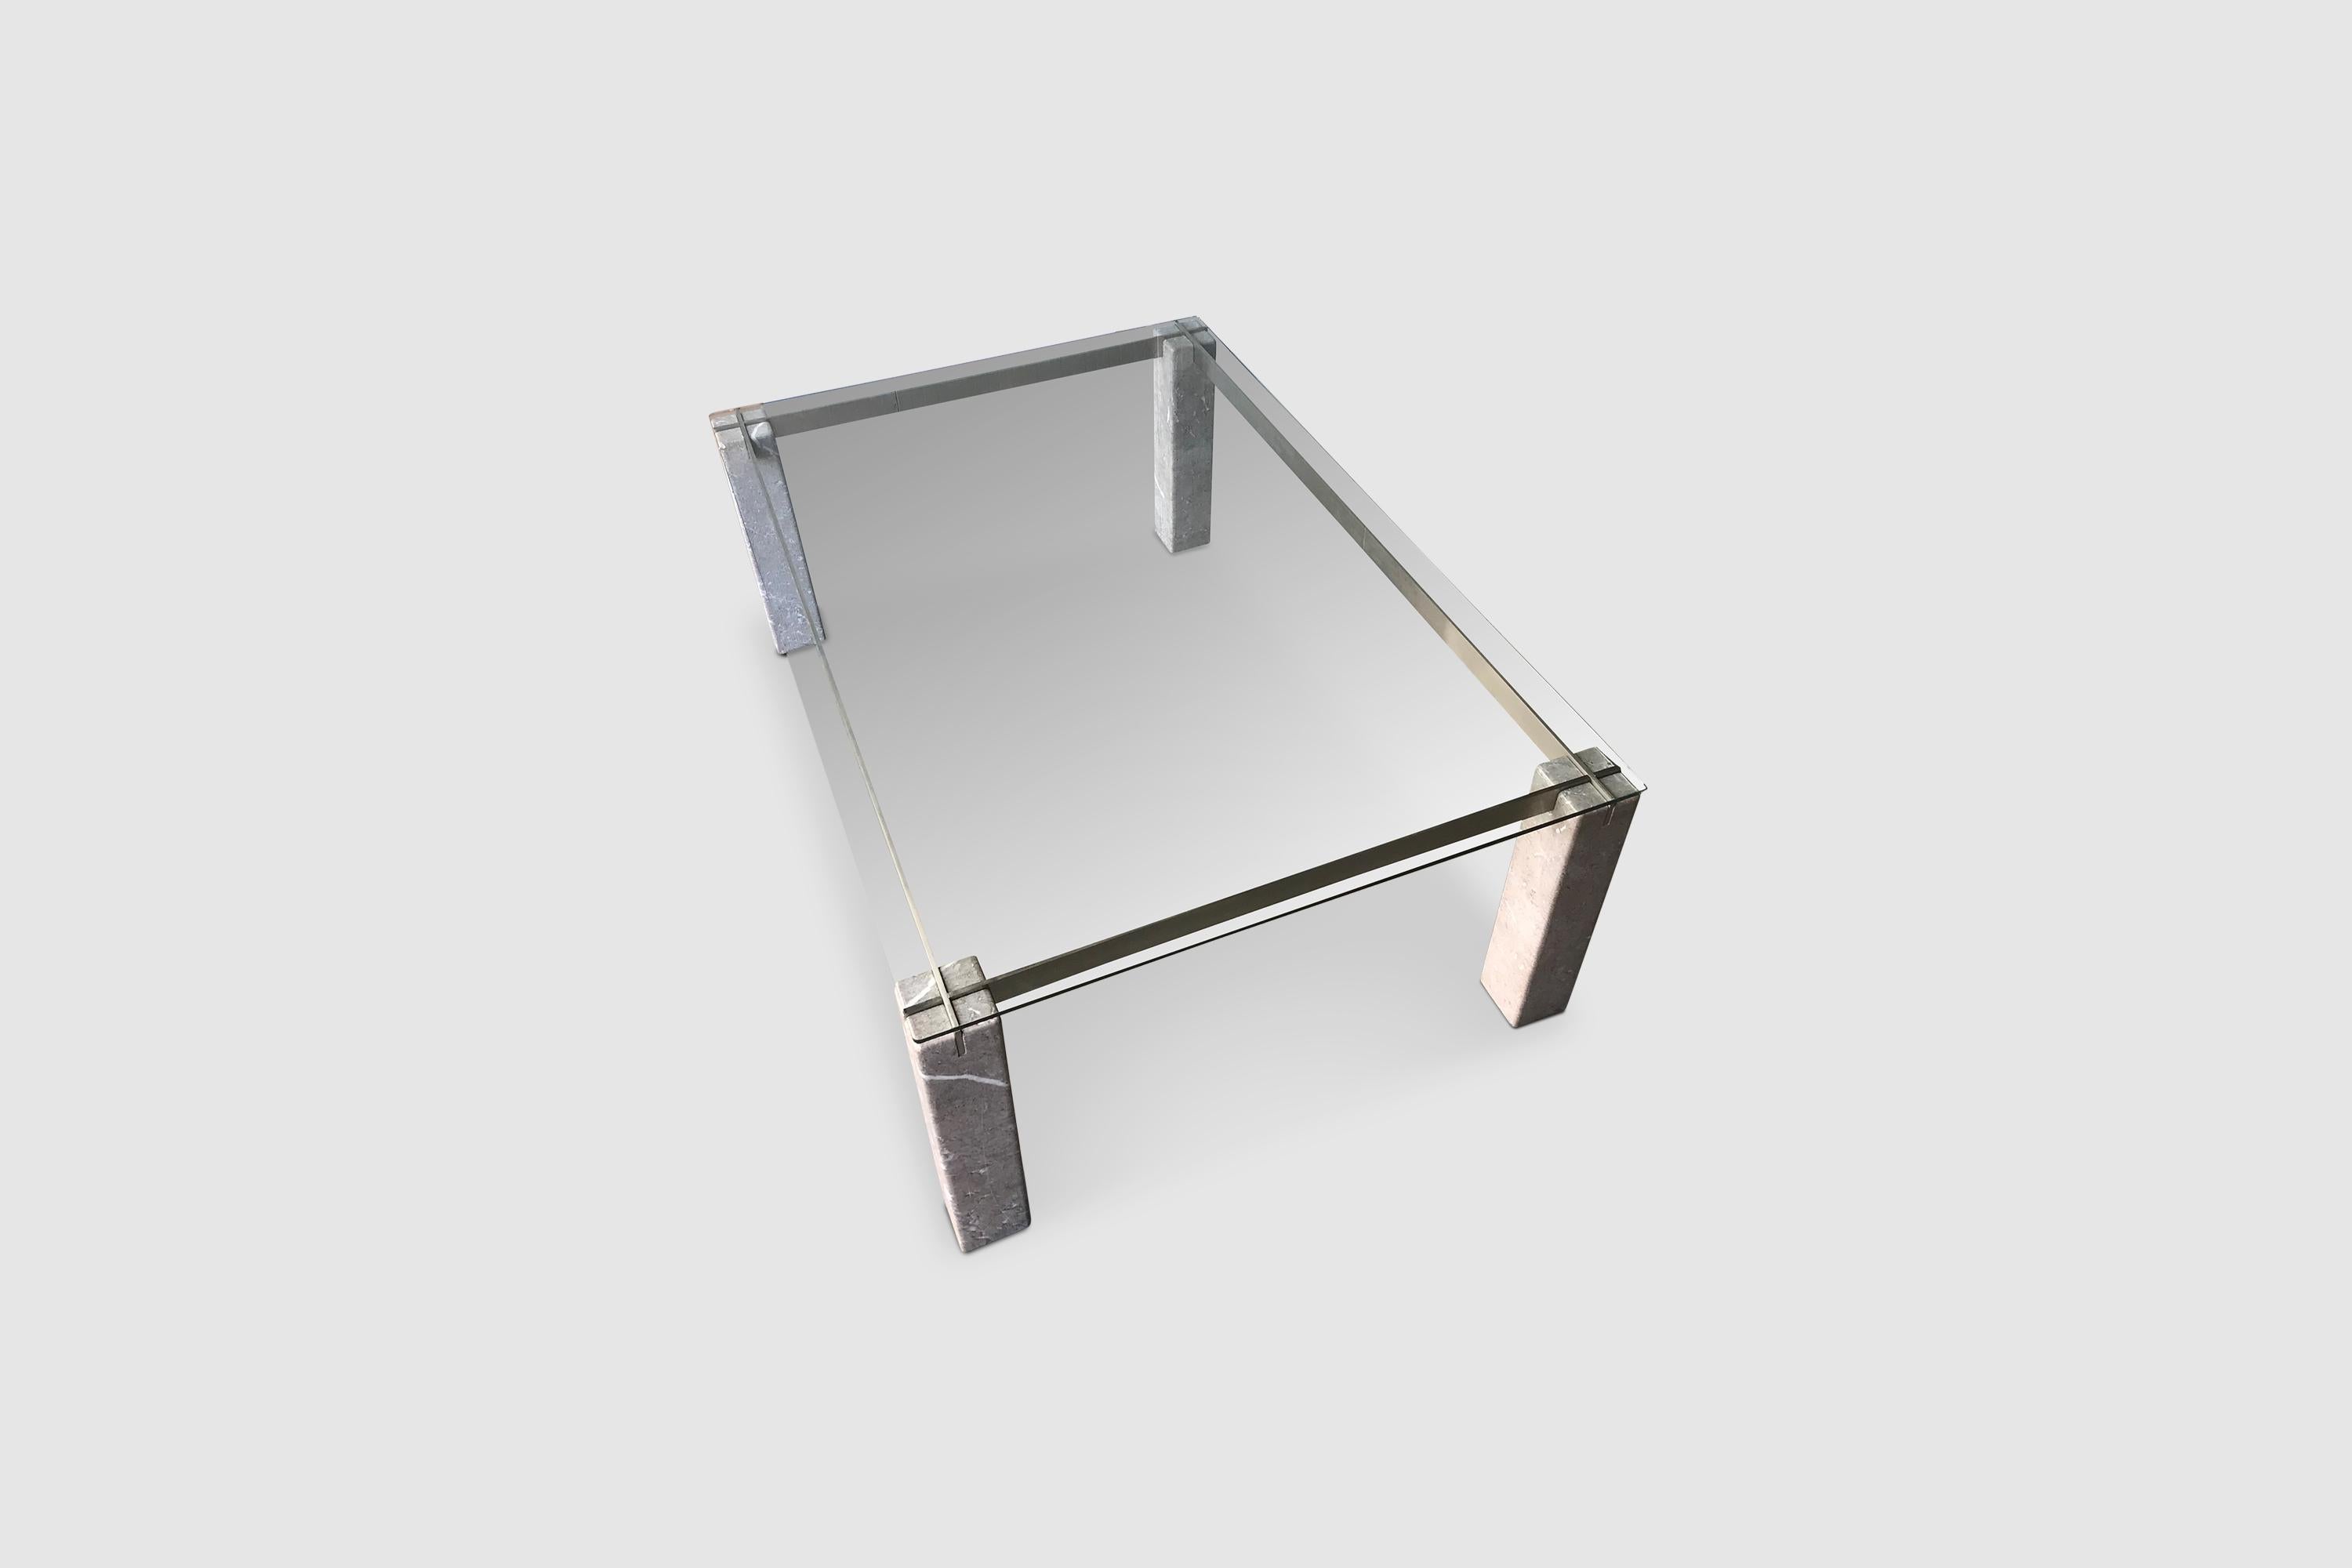 Stainless Steel Faraone Glass and Marble Dining Table by Renato Polidori for Skipper Italy 1980s For Sale